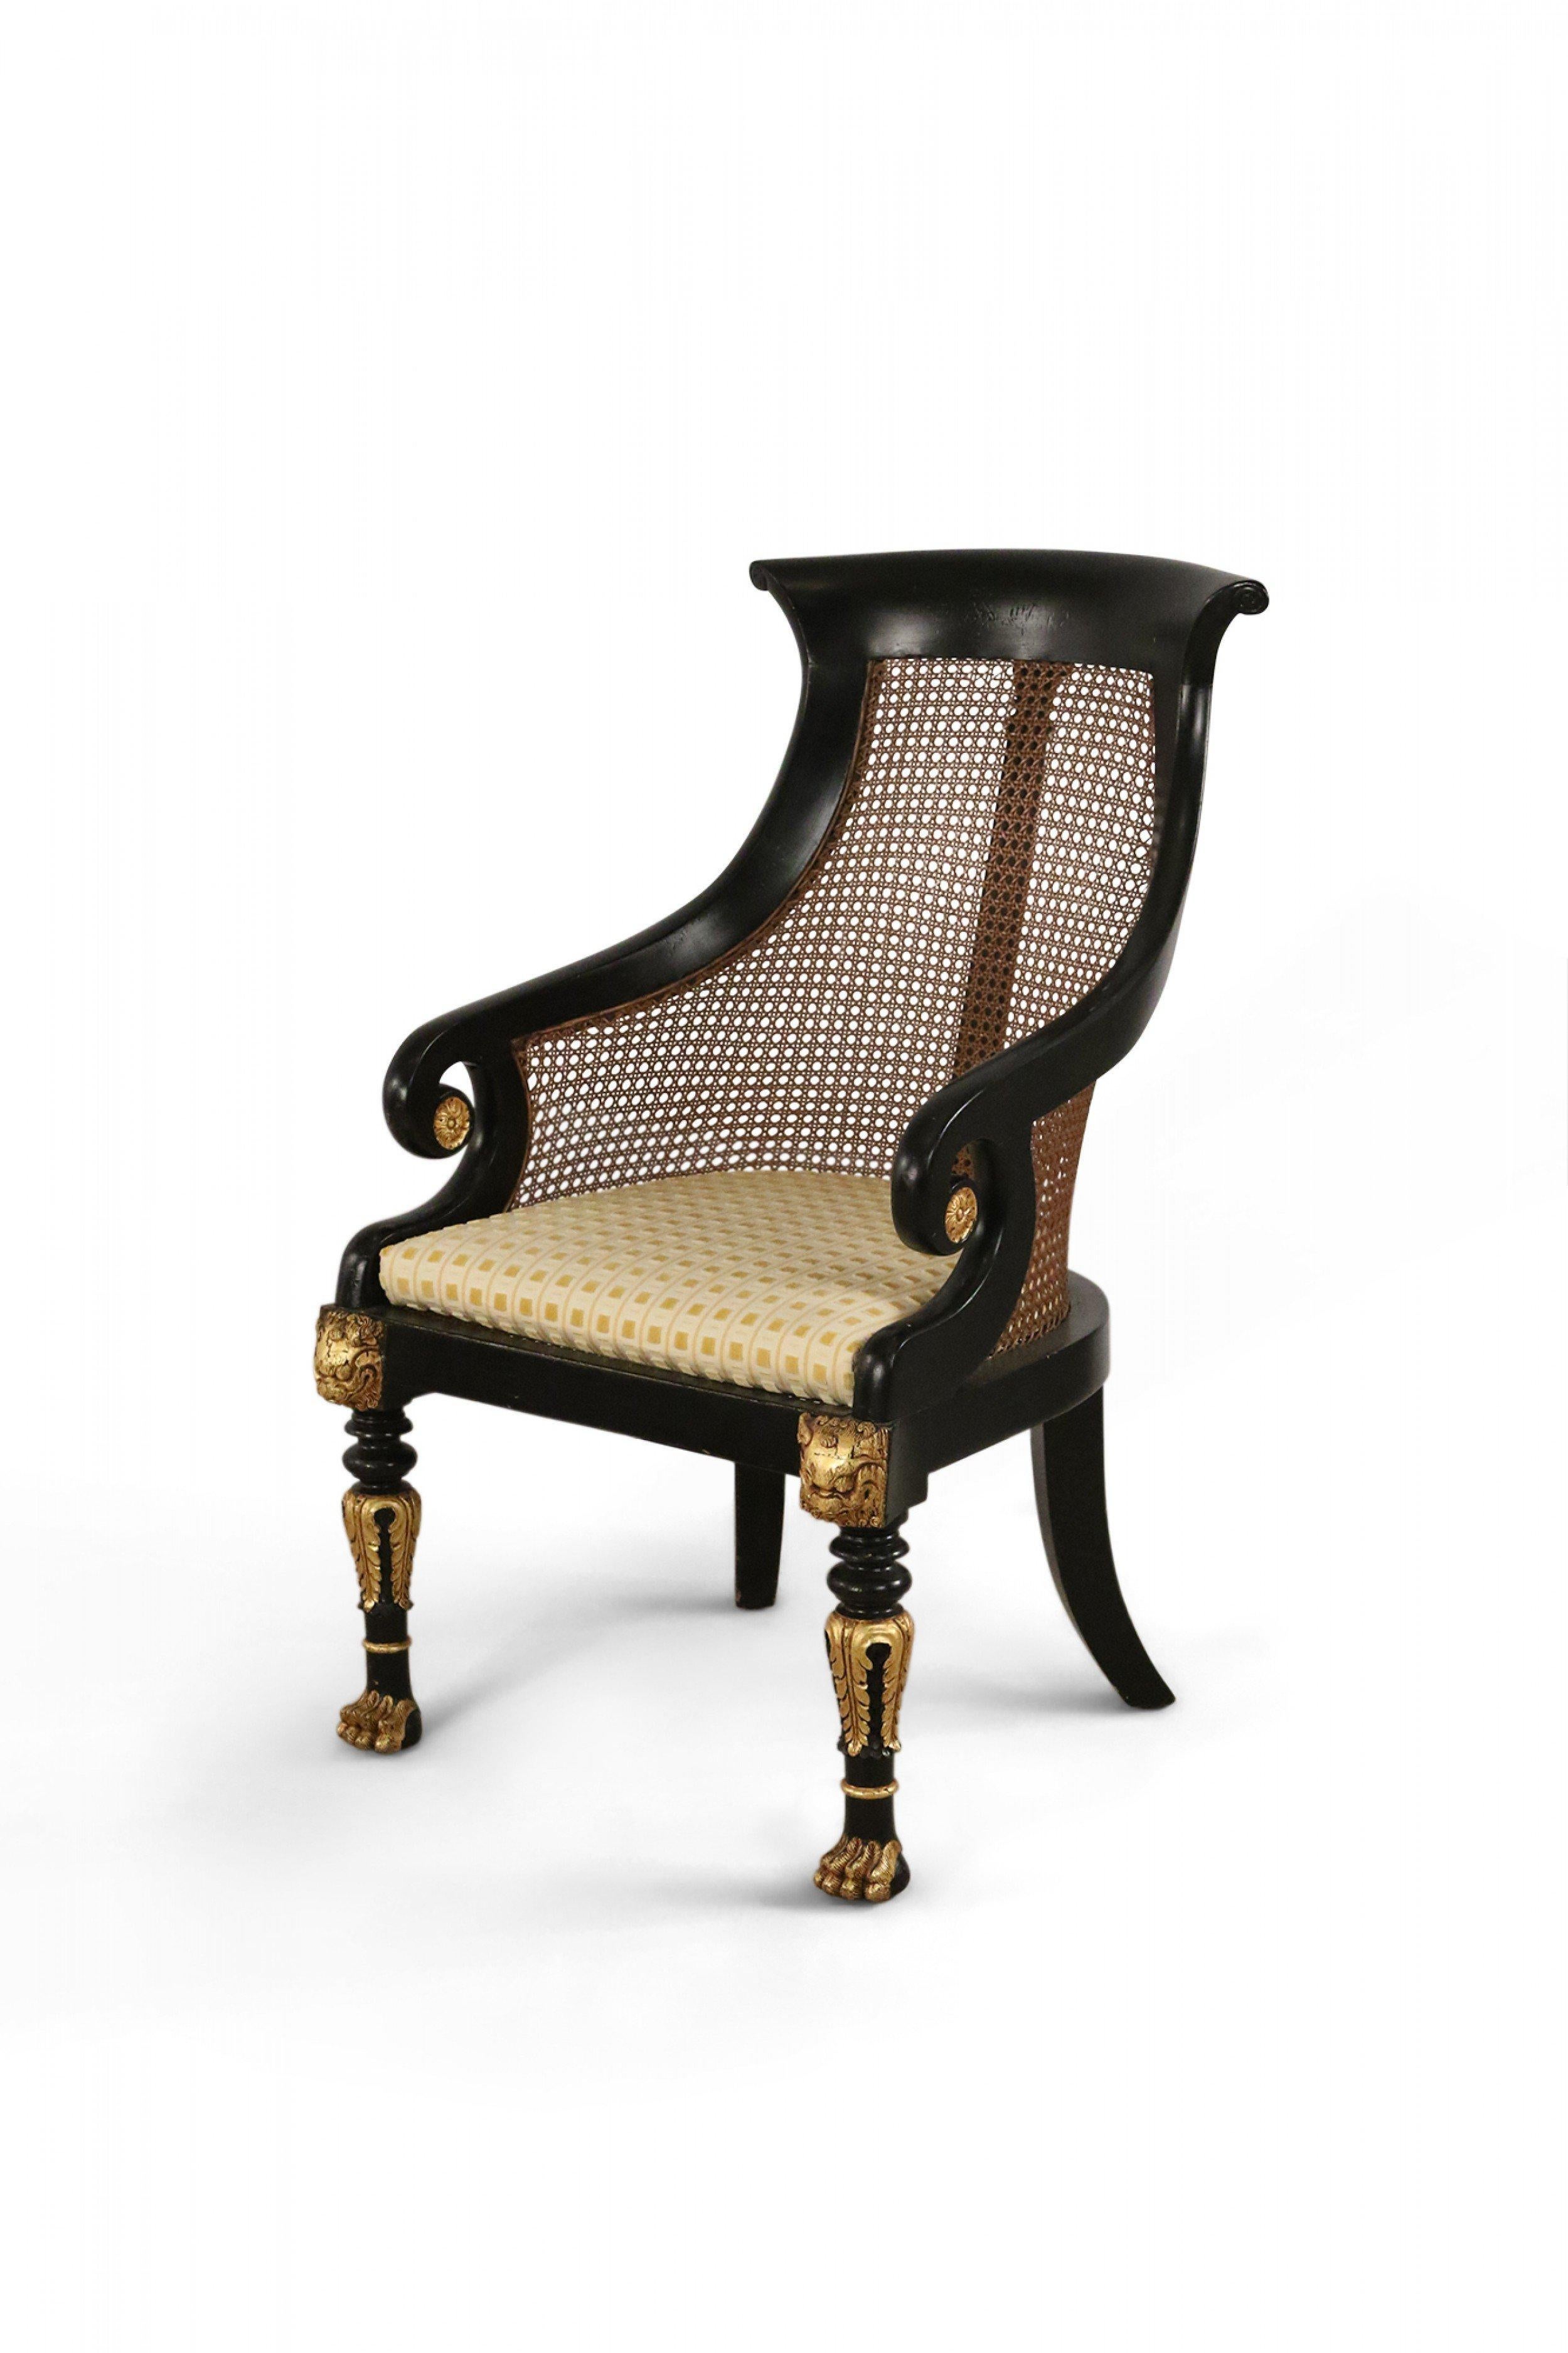 Pair of English Regency style (20th century) armchairs with black and gilt painted wooden frames with carved detail, cane seat backs, light yellow and gold seat upholstery, and carved paw feet. (Priced as pair).